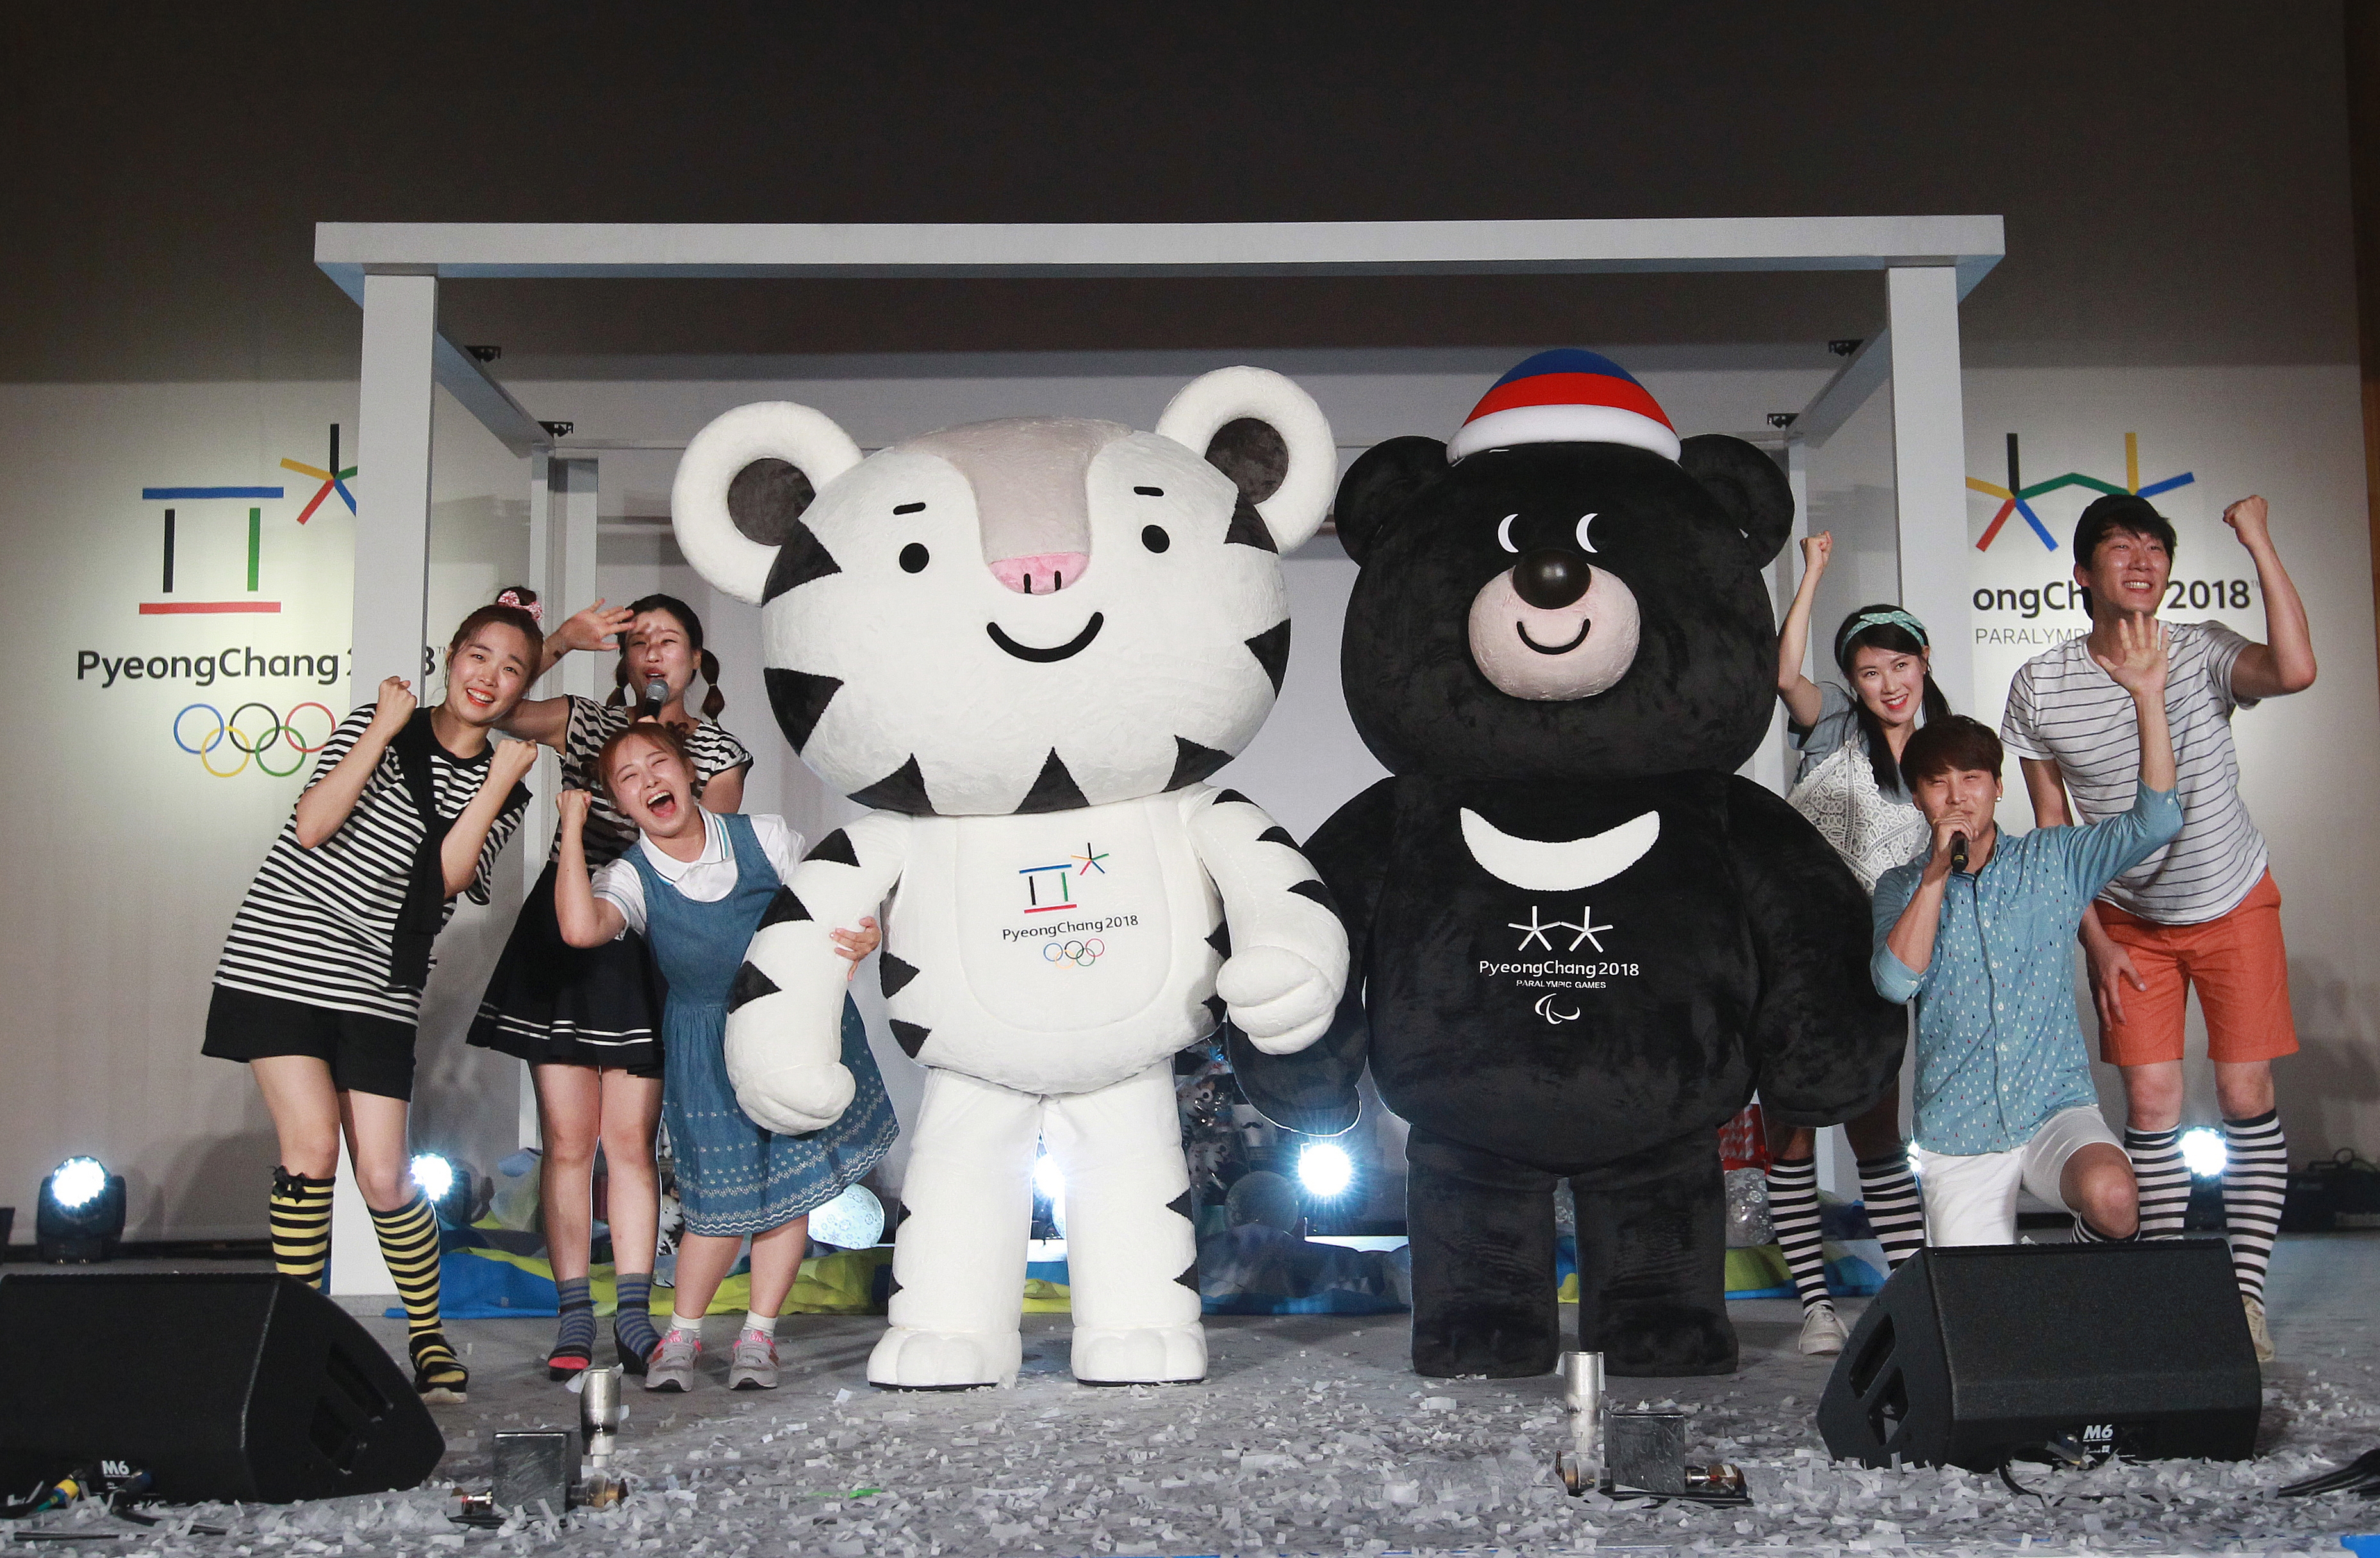 Volunteers pose with the official mascots for the 2018 PyeongChang Olympic, named Soohorang, left, and Paralympic Winter Games, named Bandabi, during their launching ceremony at Hoeng Gye Elementary School in Pyeongchang, South Korea, Monday, July 18, 2016. The PyeongChang Organizing Committee for the 2018 Olympic and Paralympic Winter Games announced on Monday it nationwide mascot promotion tour . (AP Photo/Ahn Young-joon)